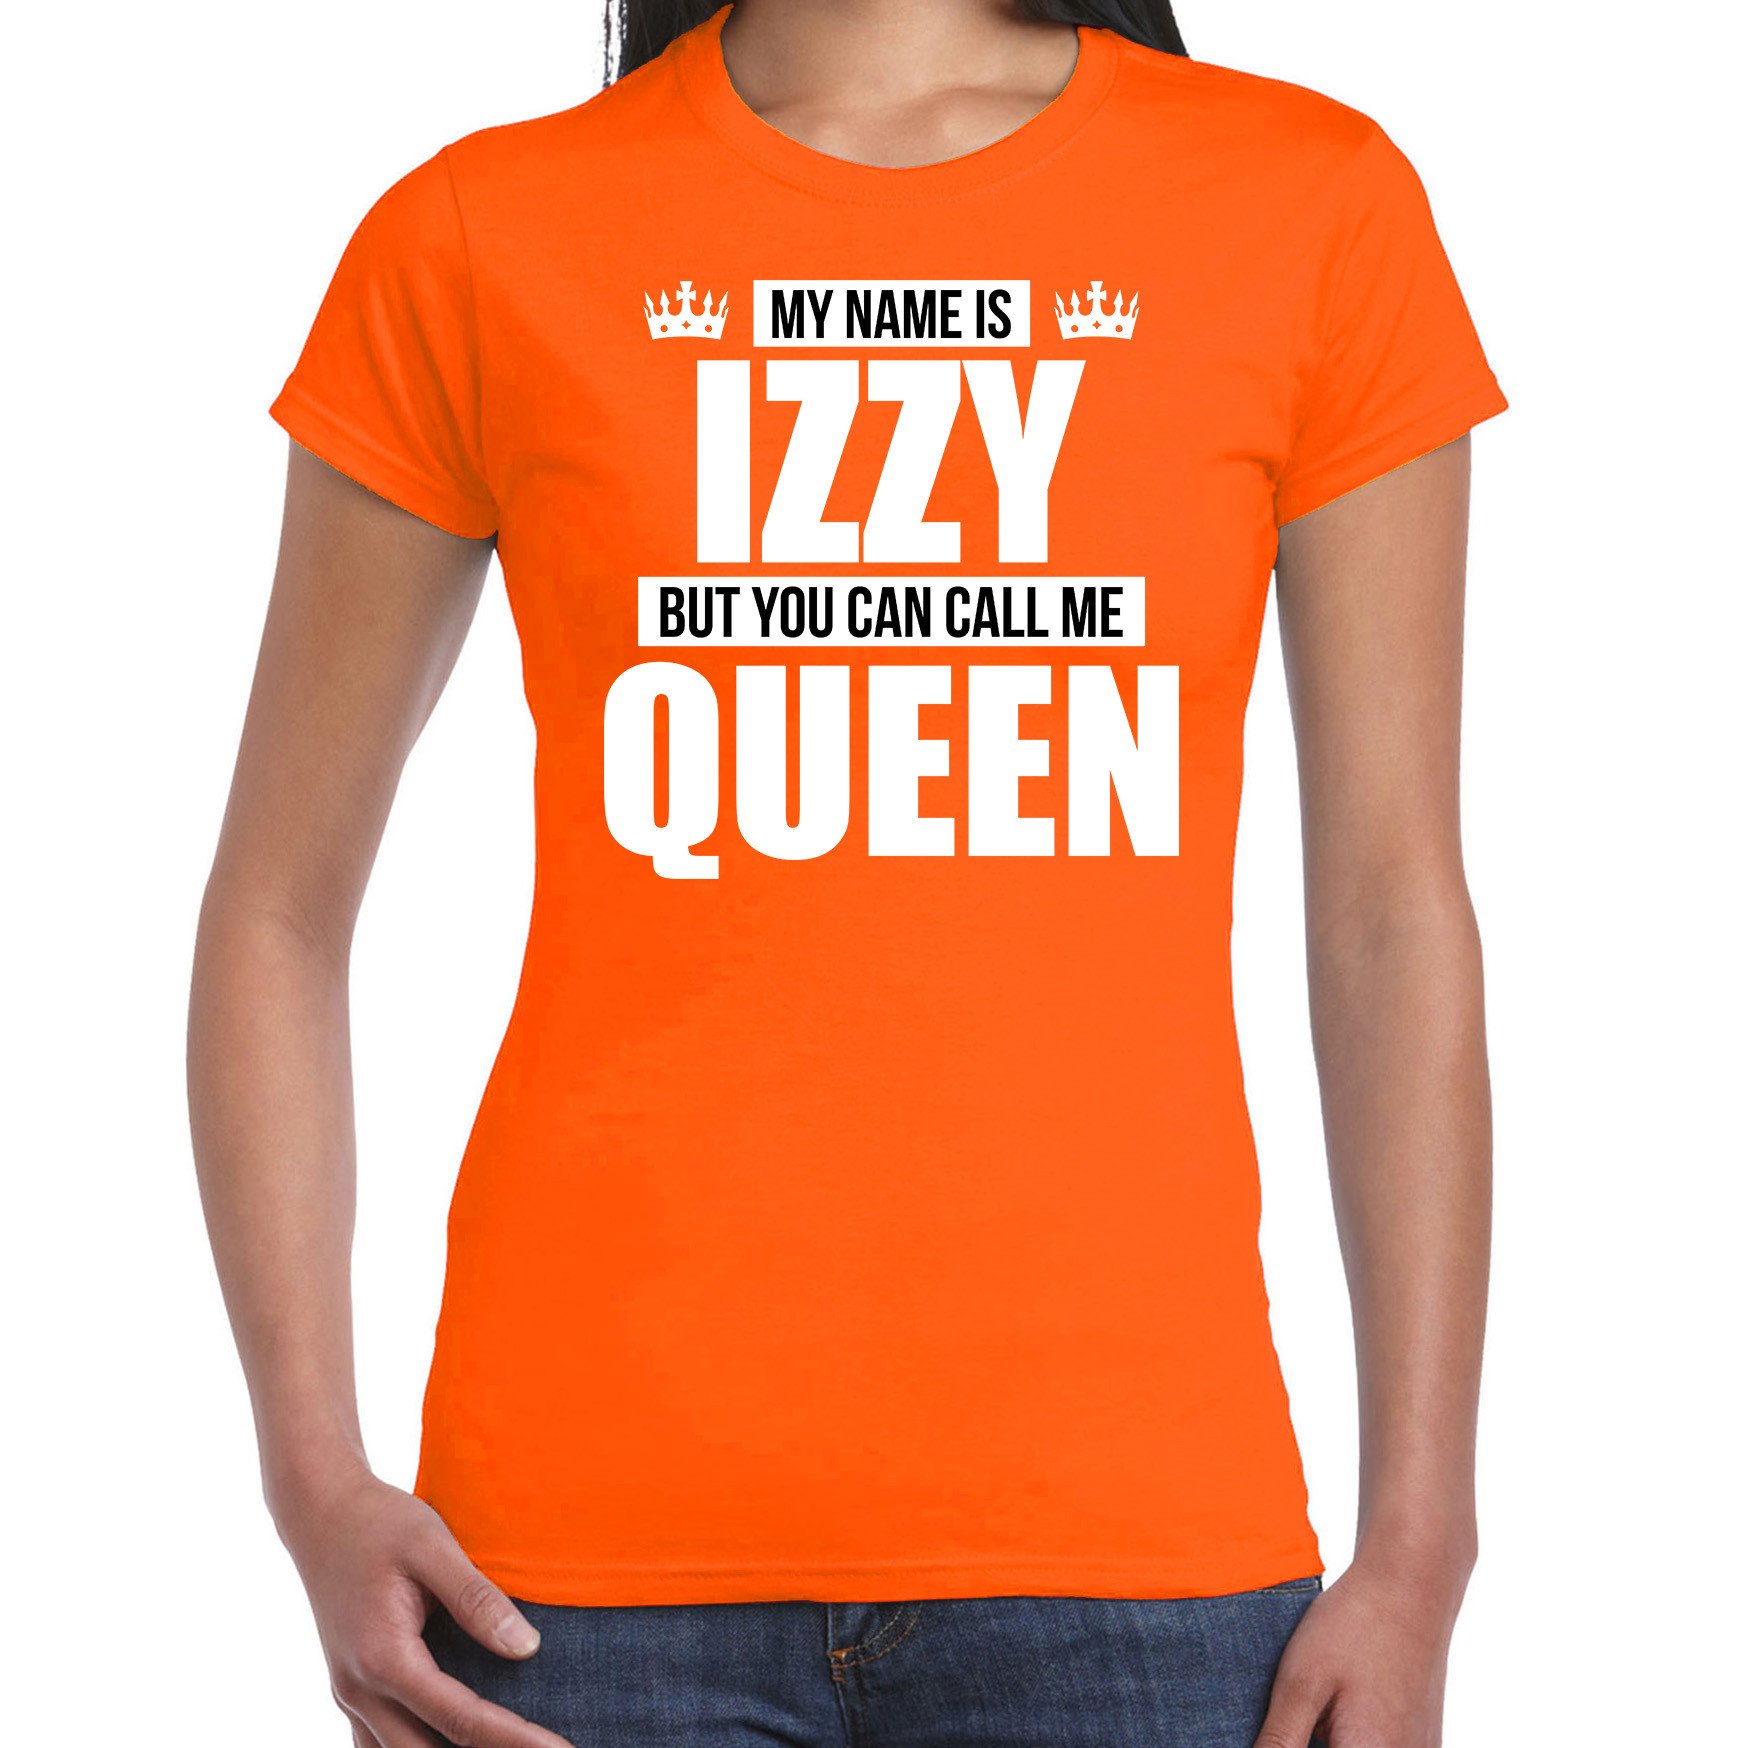 Naam My name is Izzy but you can call me Queen shirt oranje cadeau shirt dames